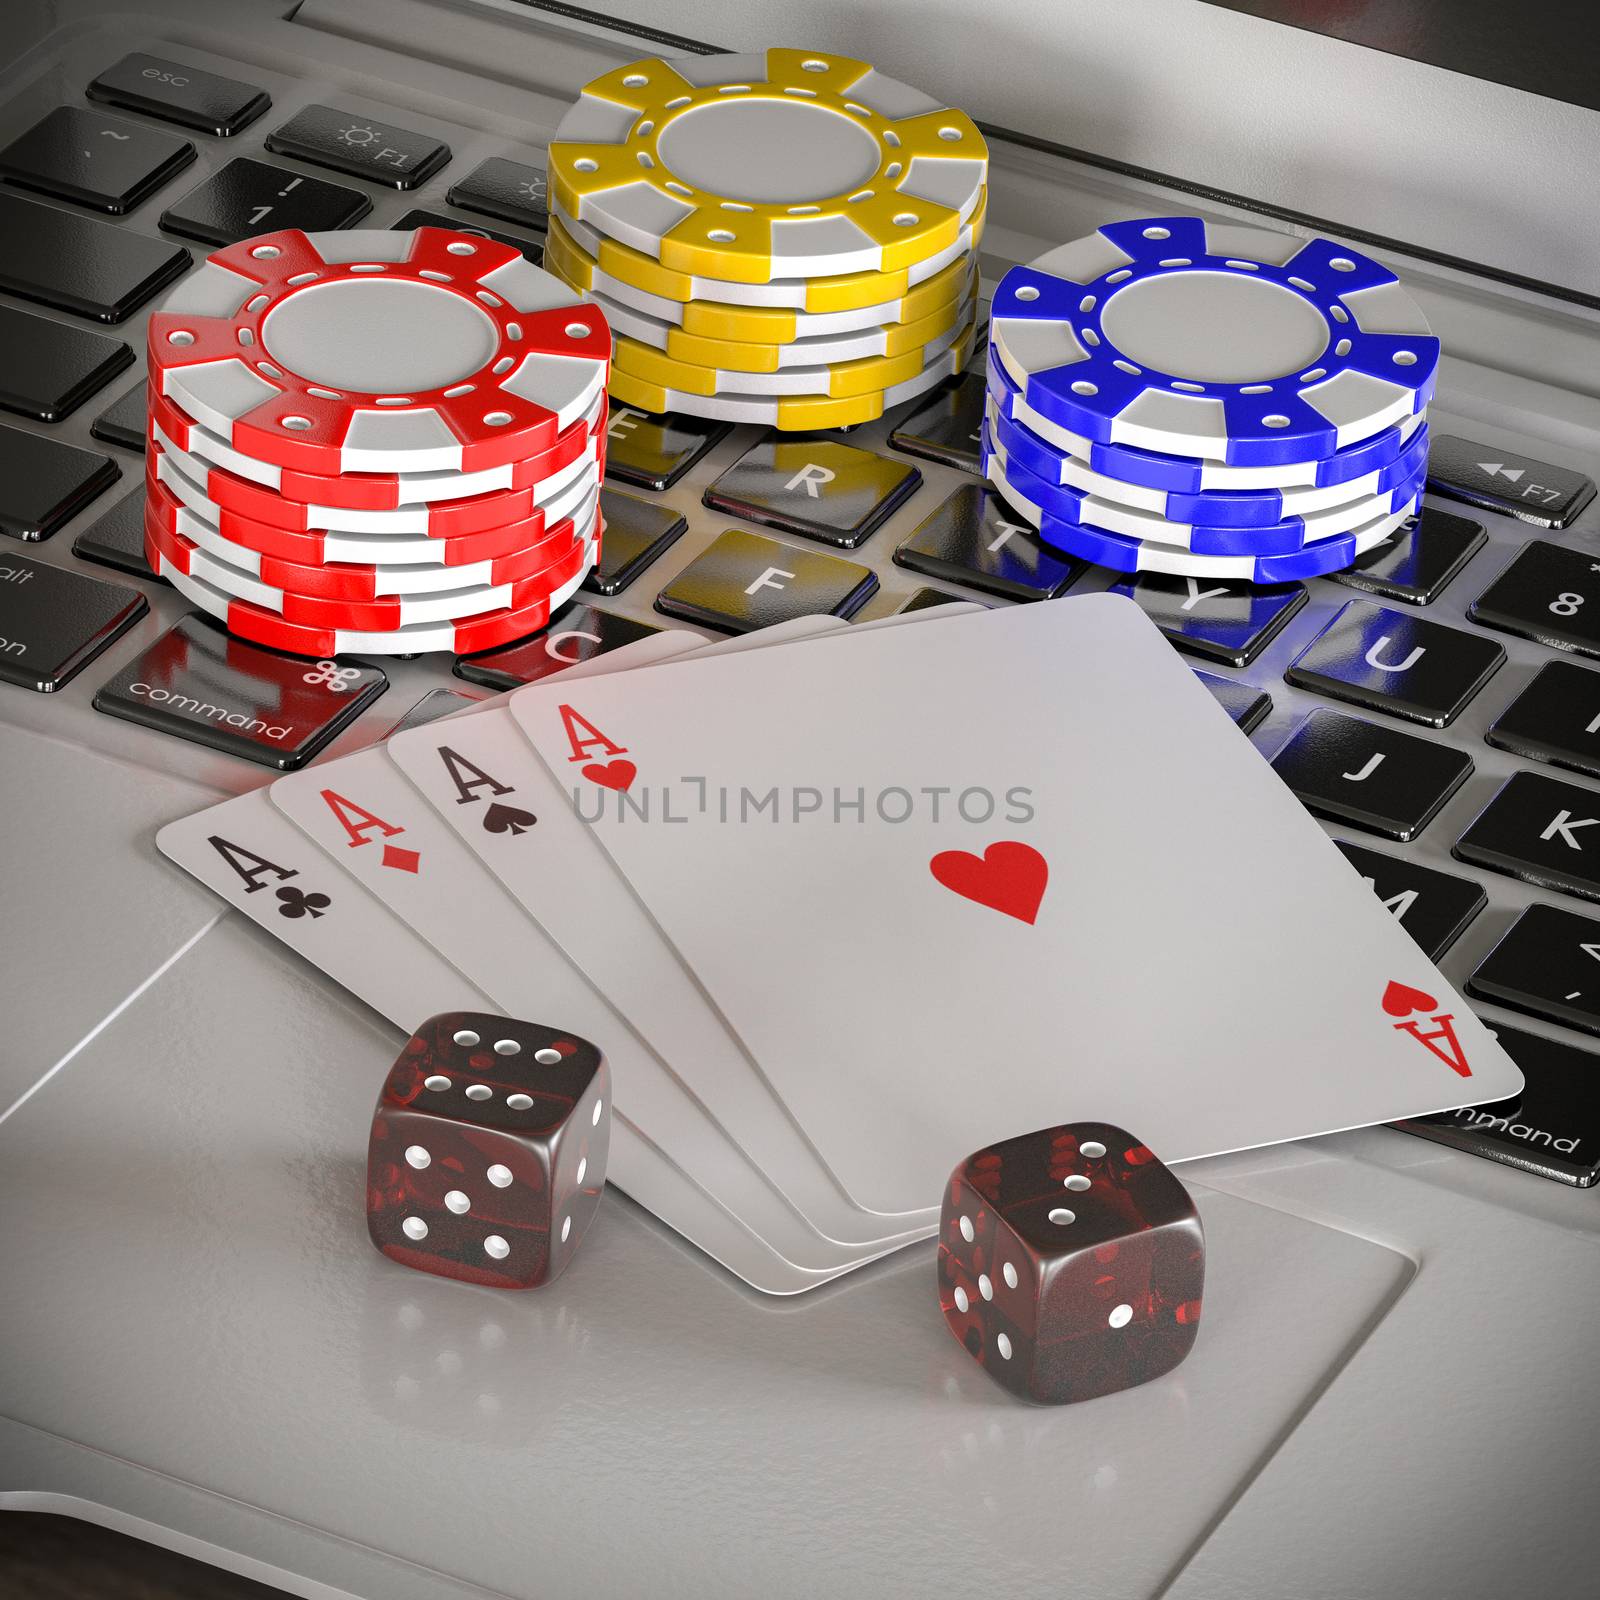 laptop with chips, dices and poker cards by Lupen